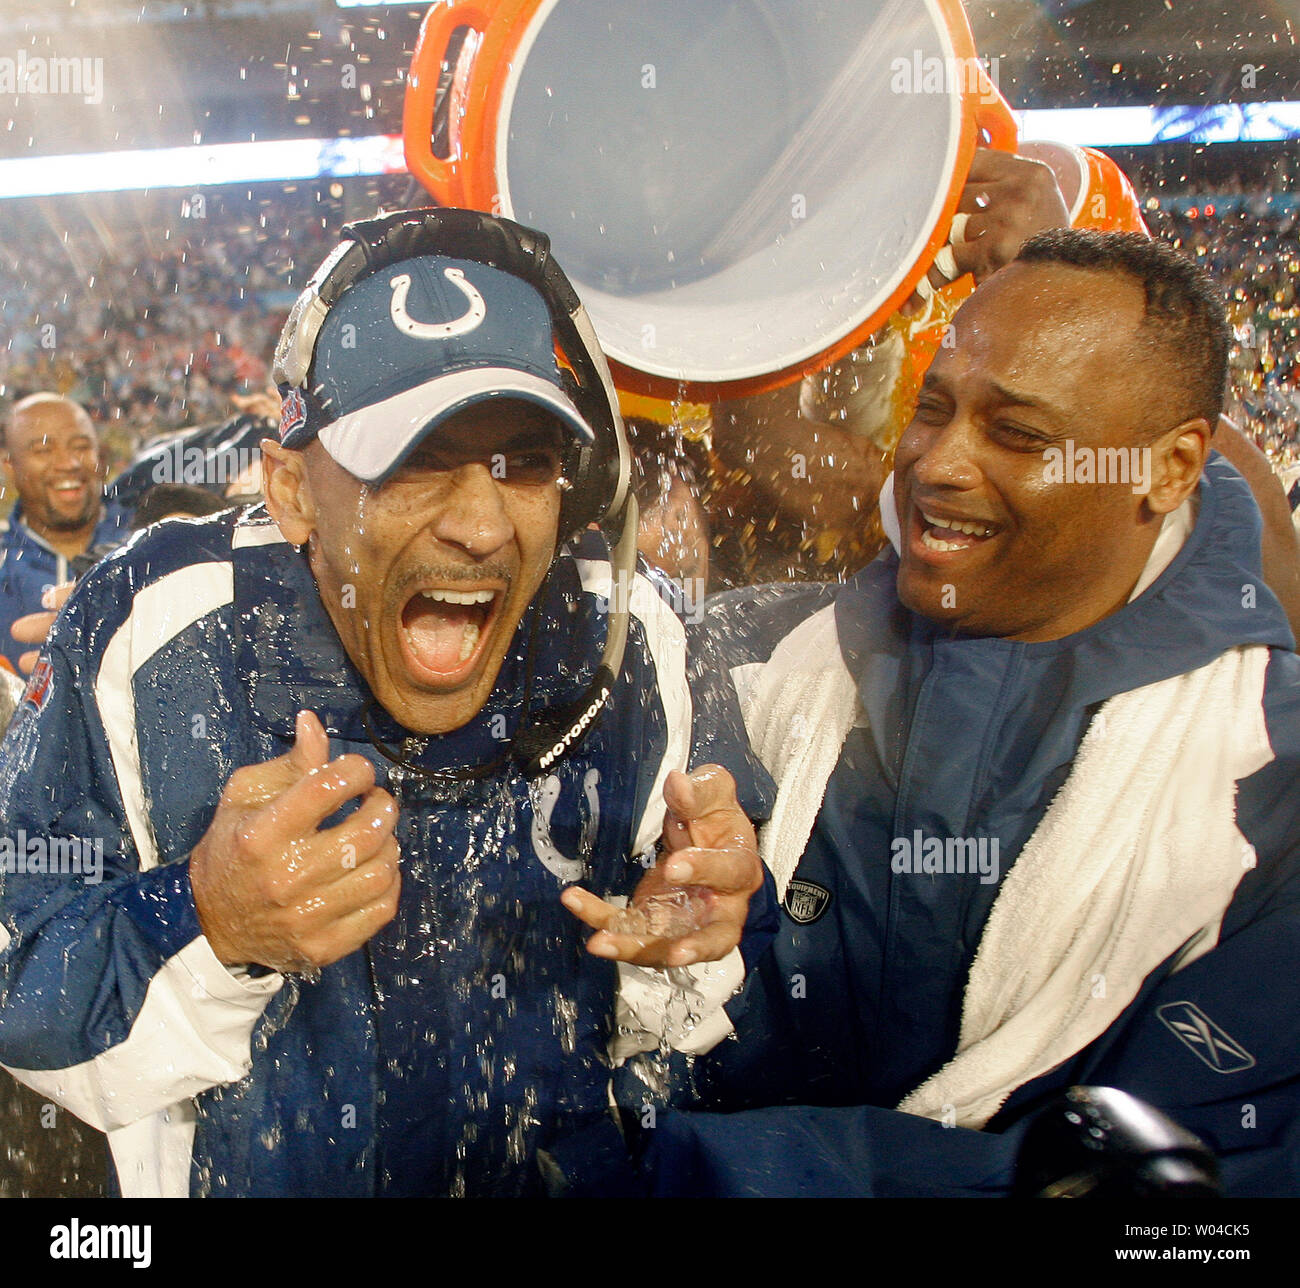 Super Bowl reflections: Tony Dungy on playing, coaching in the Super Bowl